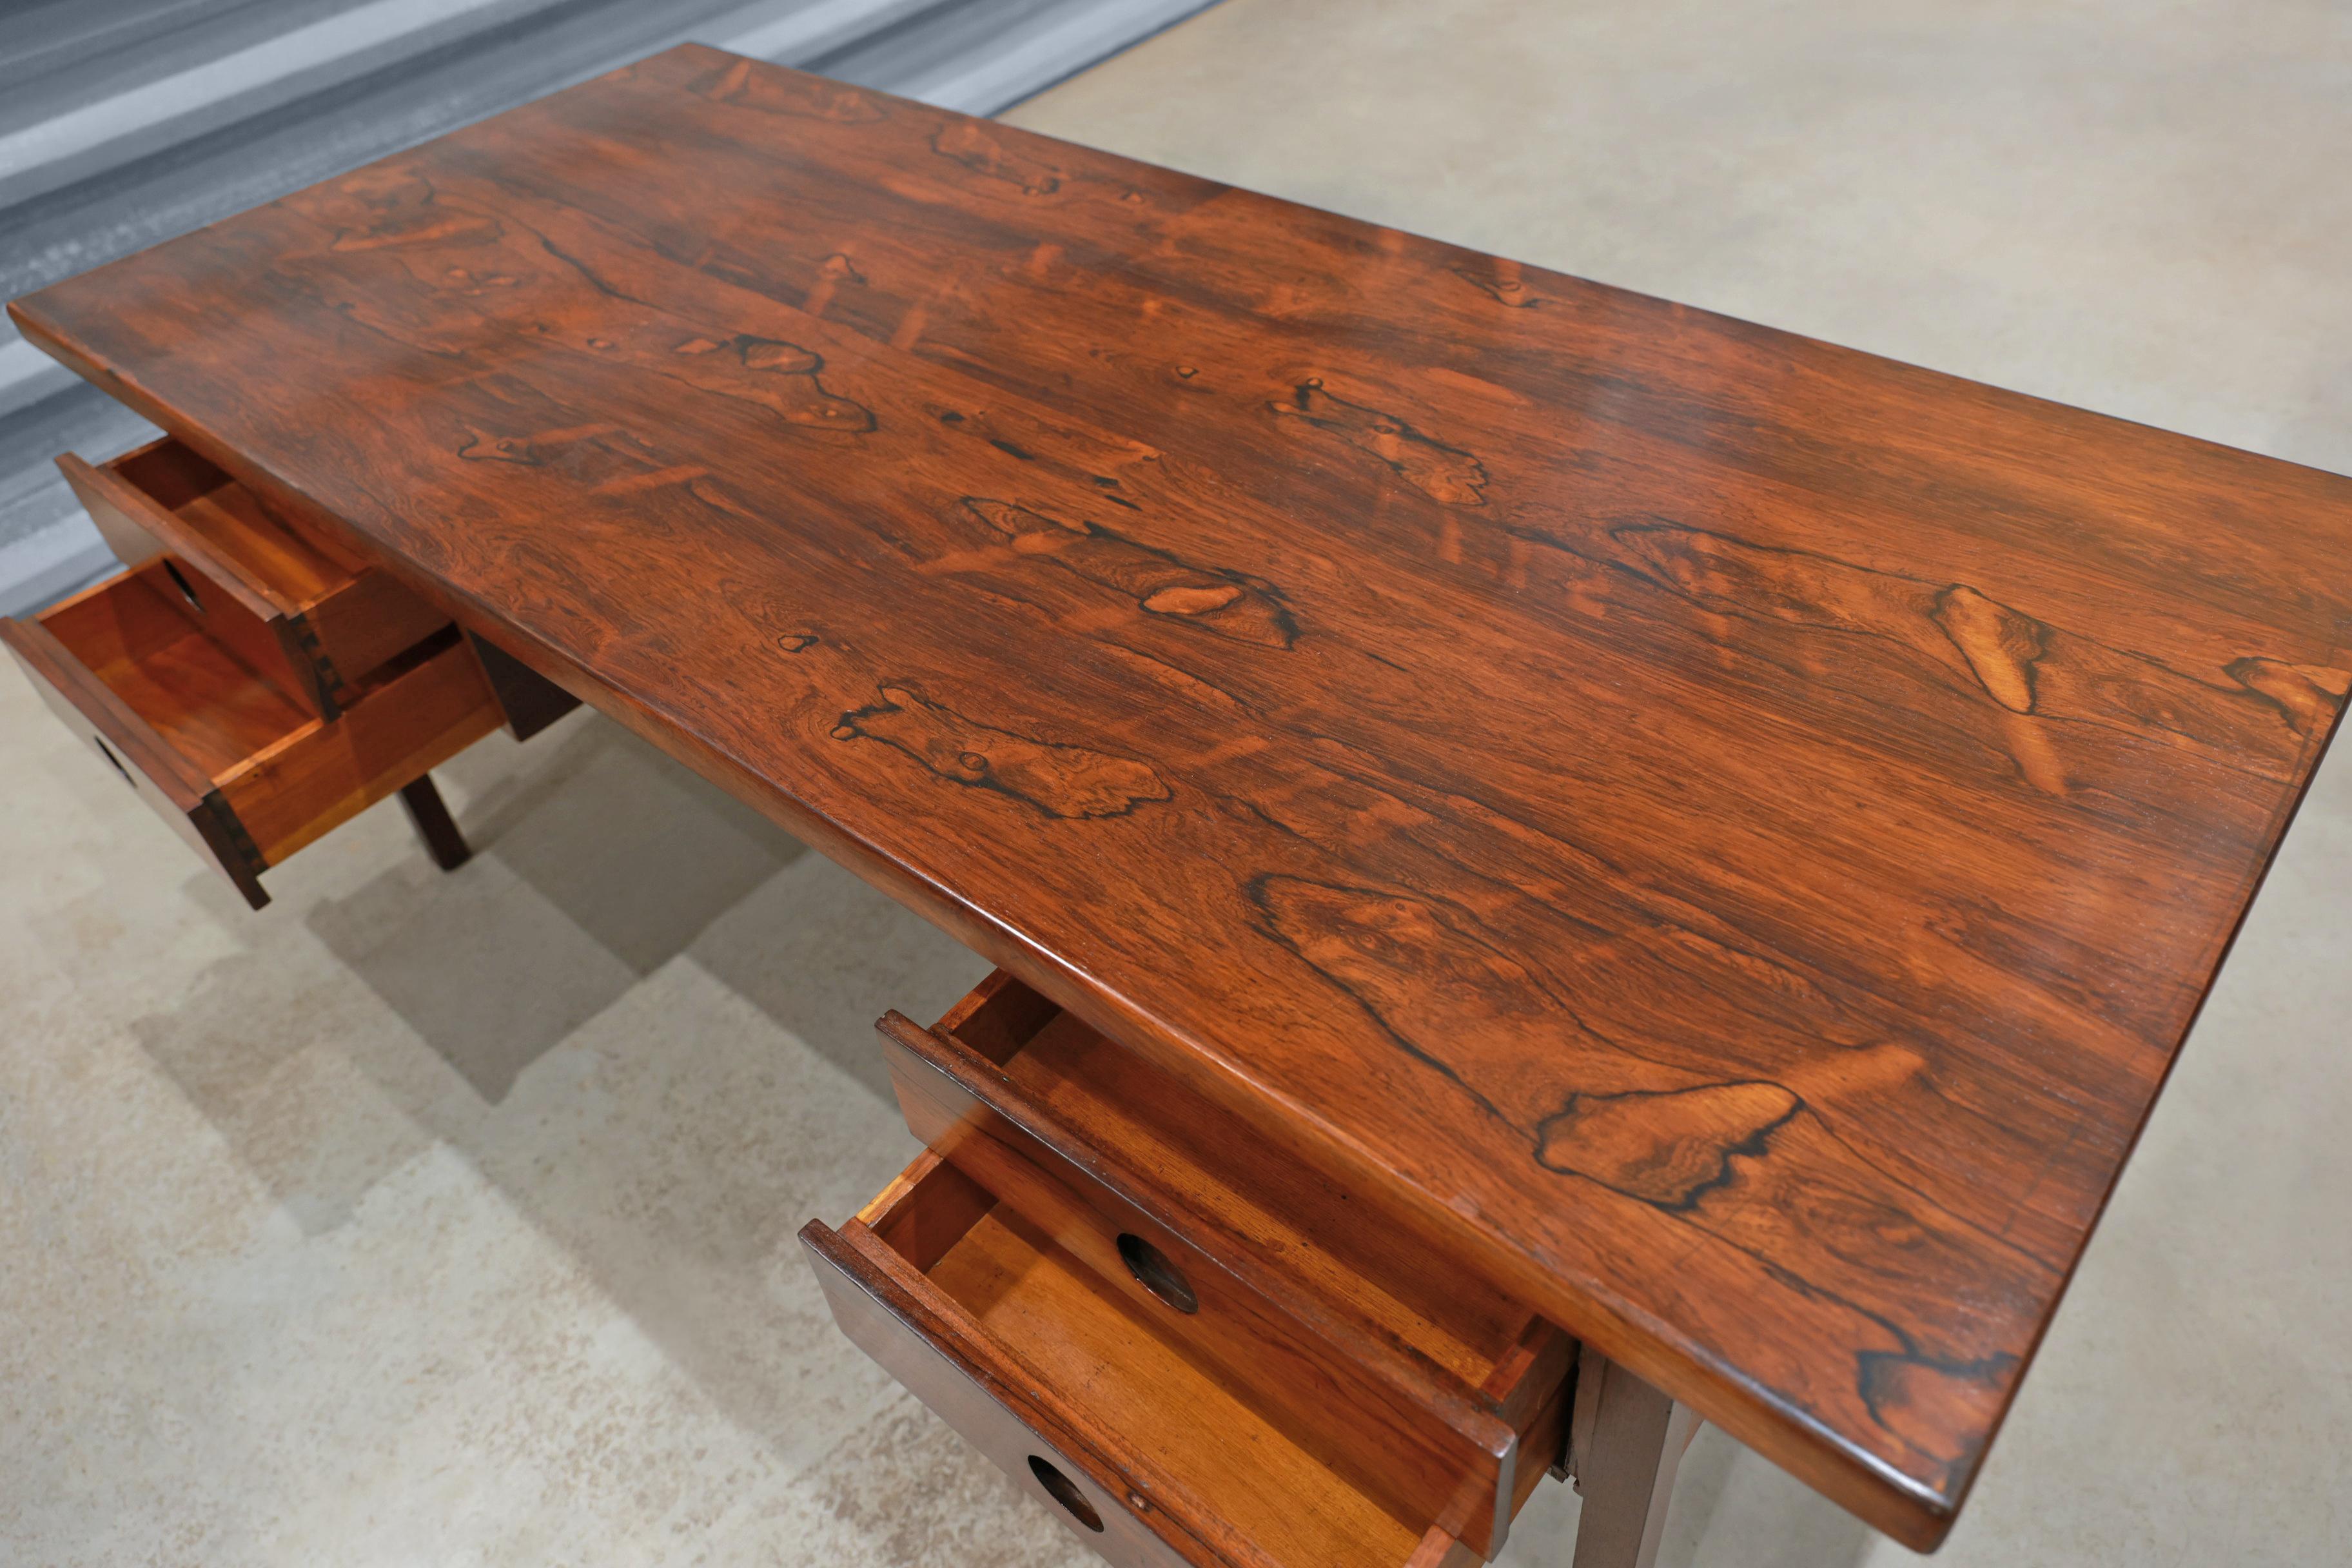 The “Clara” desk is made with Brazilian rosewood, also known as jacaranda, with a rosewood veneer. The hardwood has been expertly refinished, displaying vibrant wood veins. The desk features four drawers (two on each side) with four robust legs.